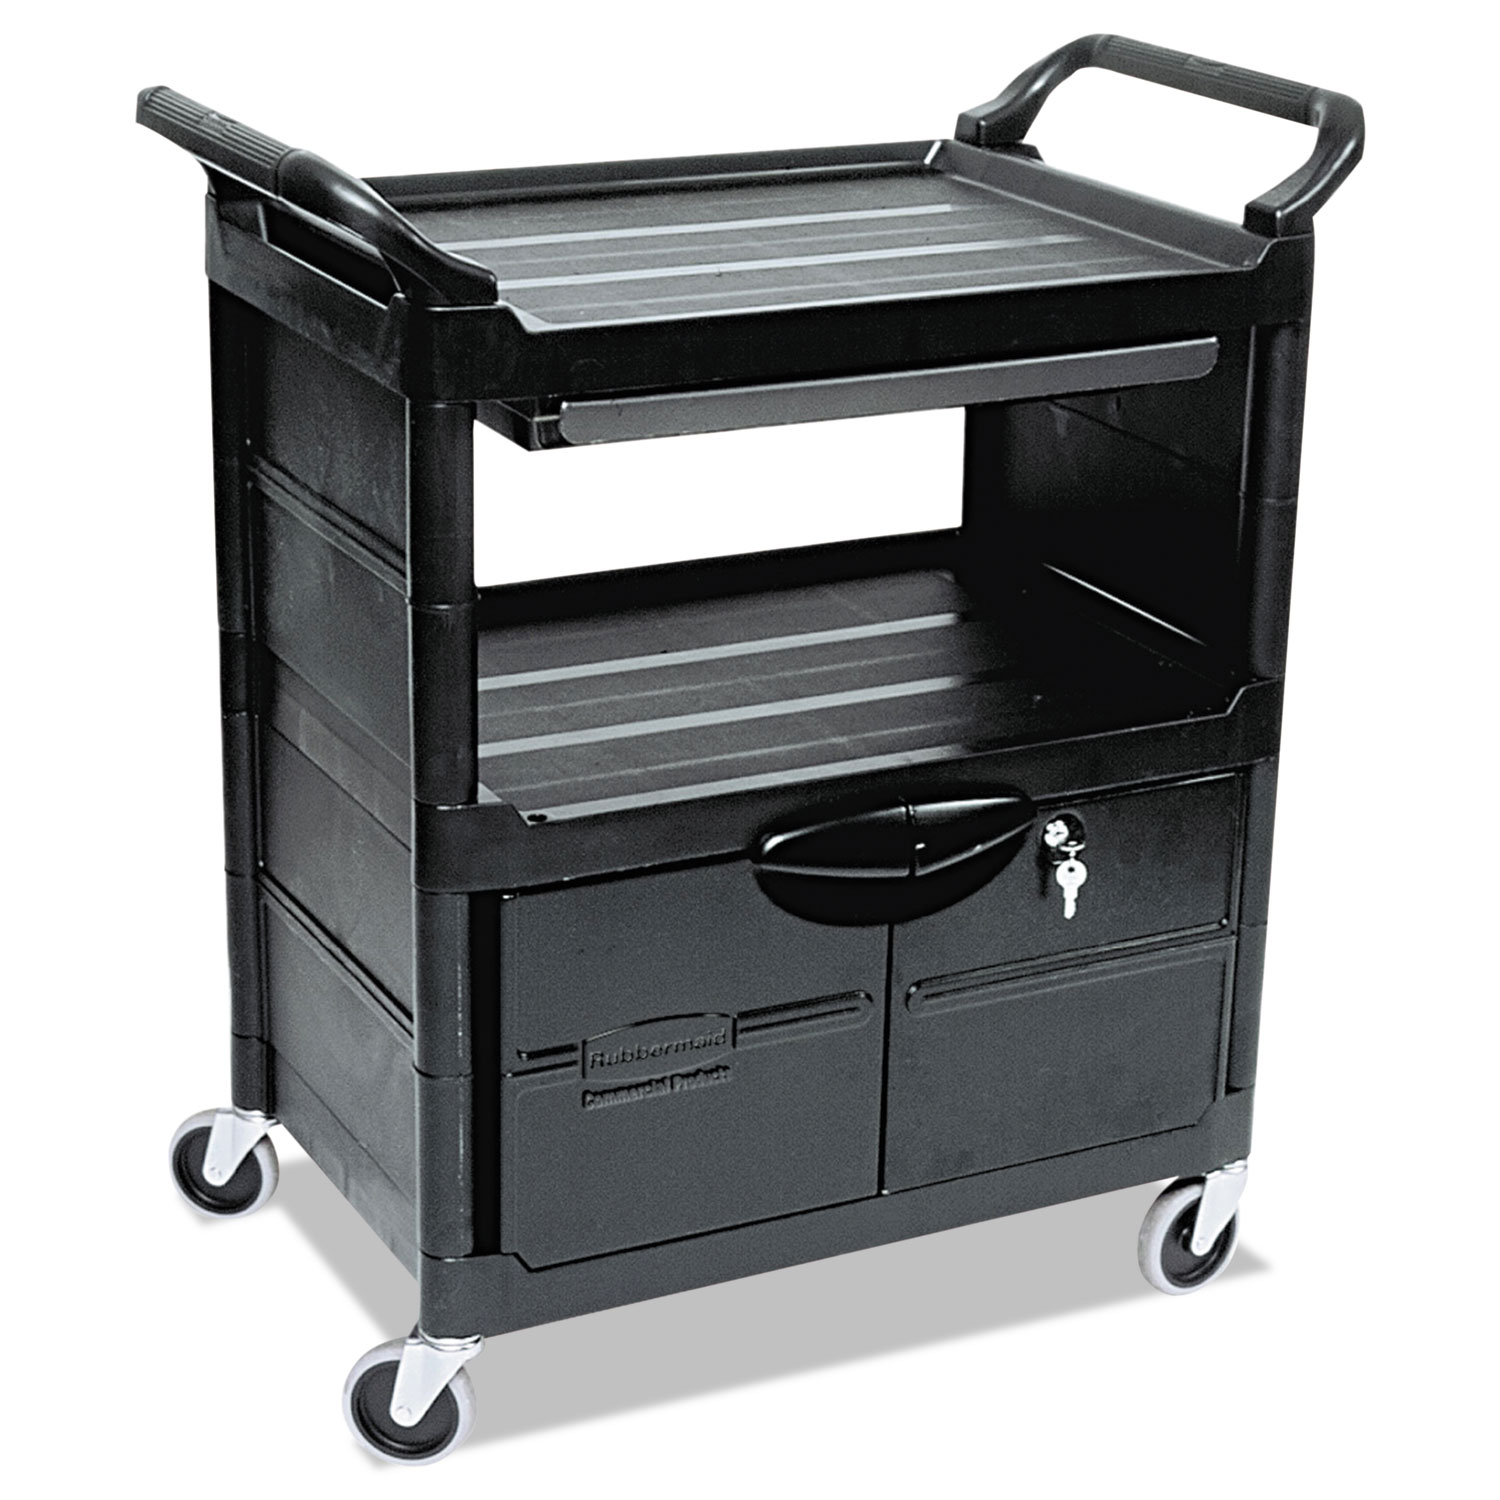 Rubbermaid Commercial Products Handling 2 Shelf Utility Service Cart Medium  Size